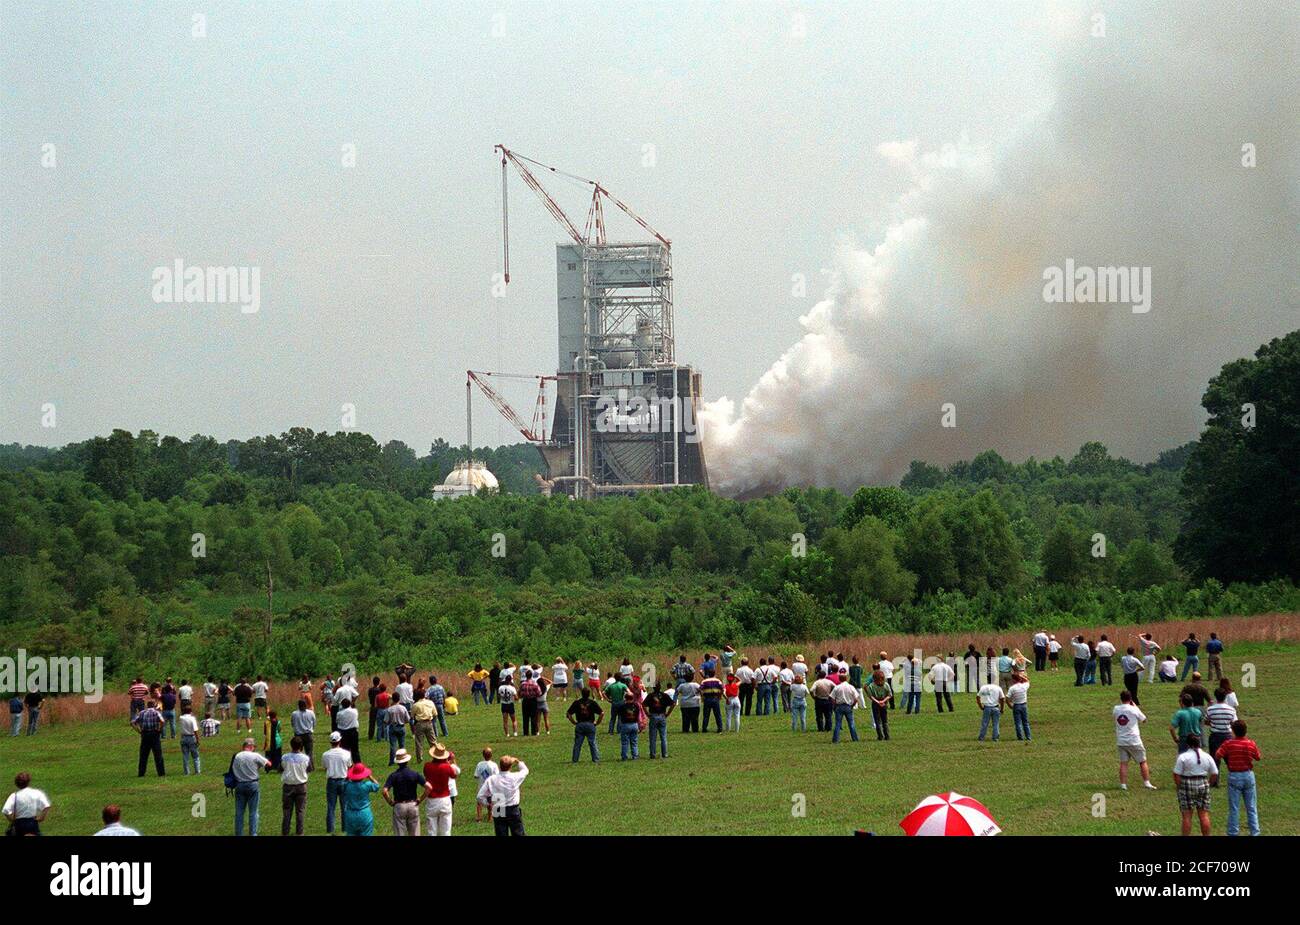 On the 25th Anniversary of the Apollo 11 (the first moon landing mission) launch, Marshall Space & Flight Center celebrated with a test firing of the Space Shuttle Main Engine (SSME) at the Technology Test Bed (TTB). This drew a large crowd who stood in the fields around the test site and watched as plumes of white smoke verified ignition. Stock Photo